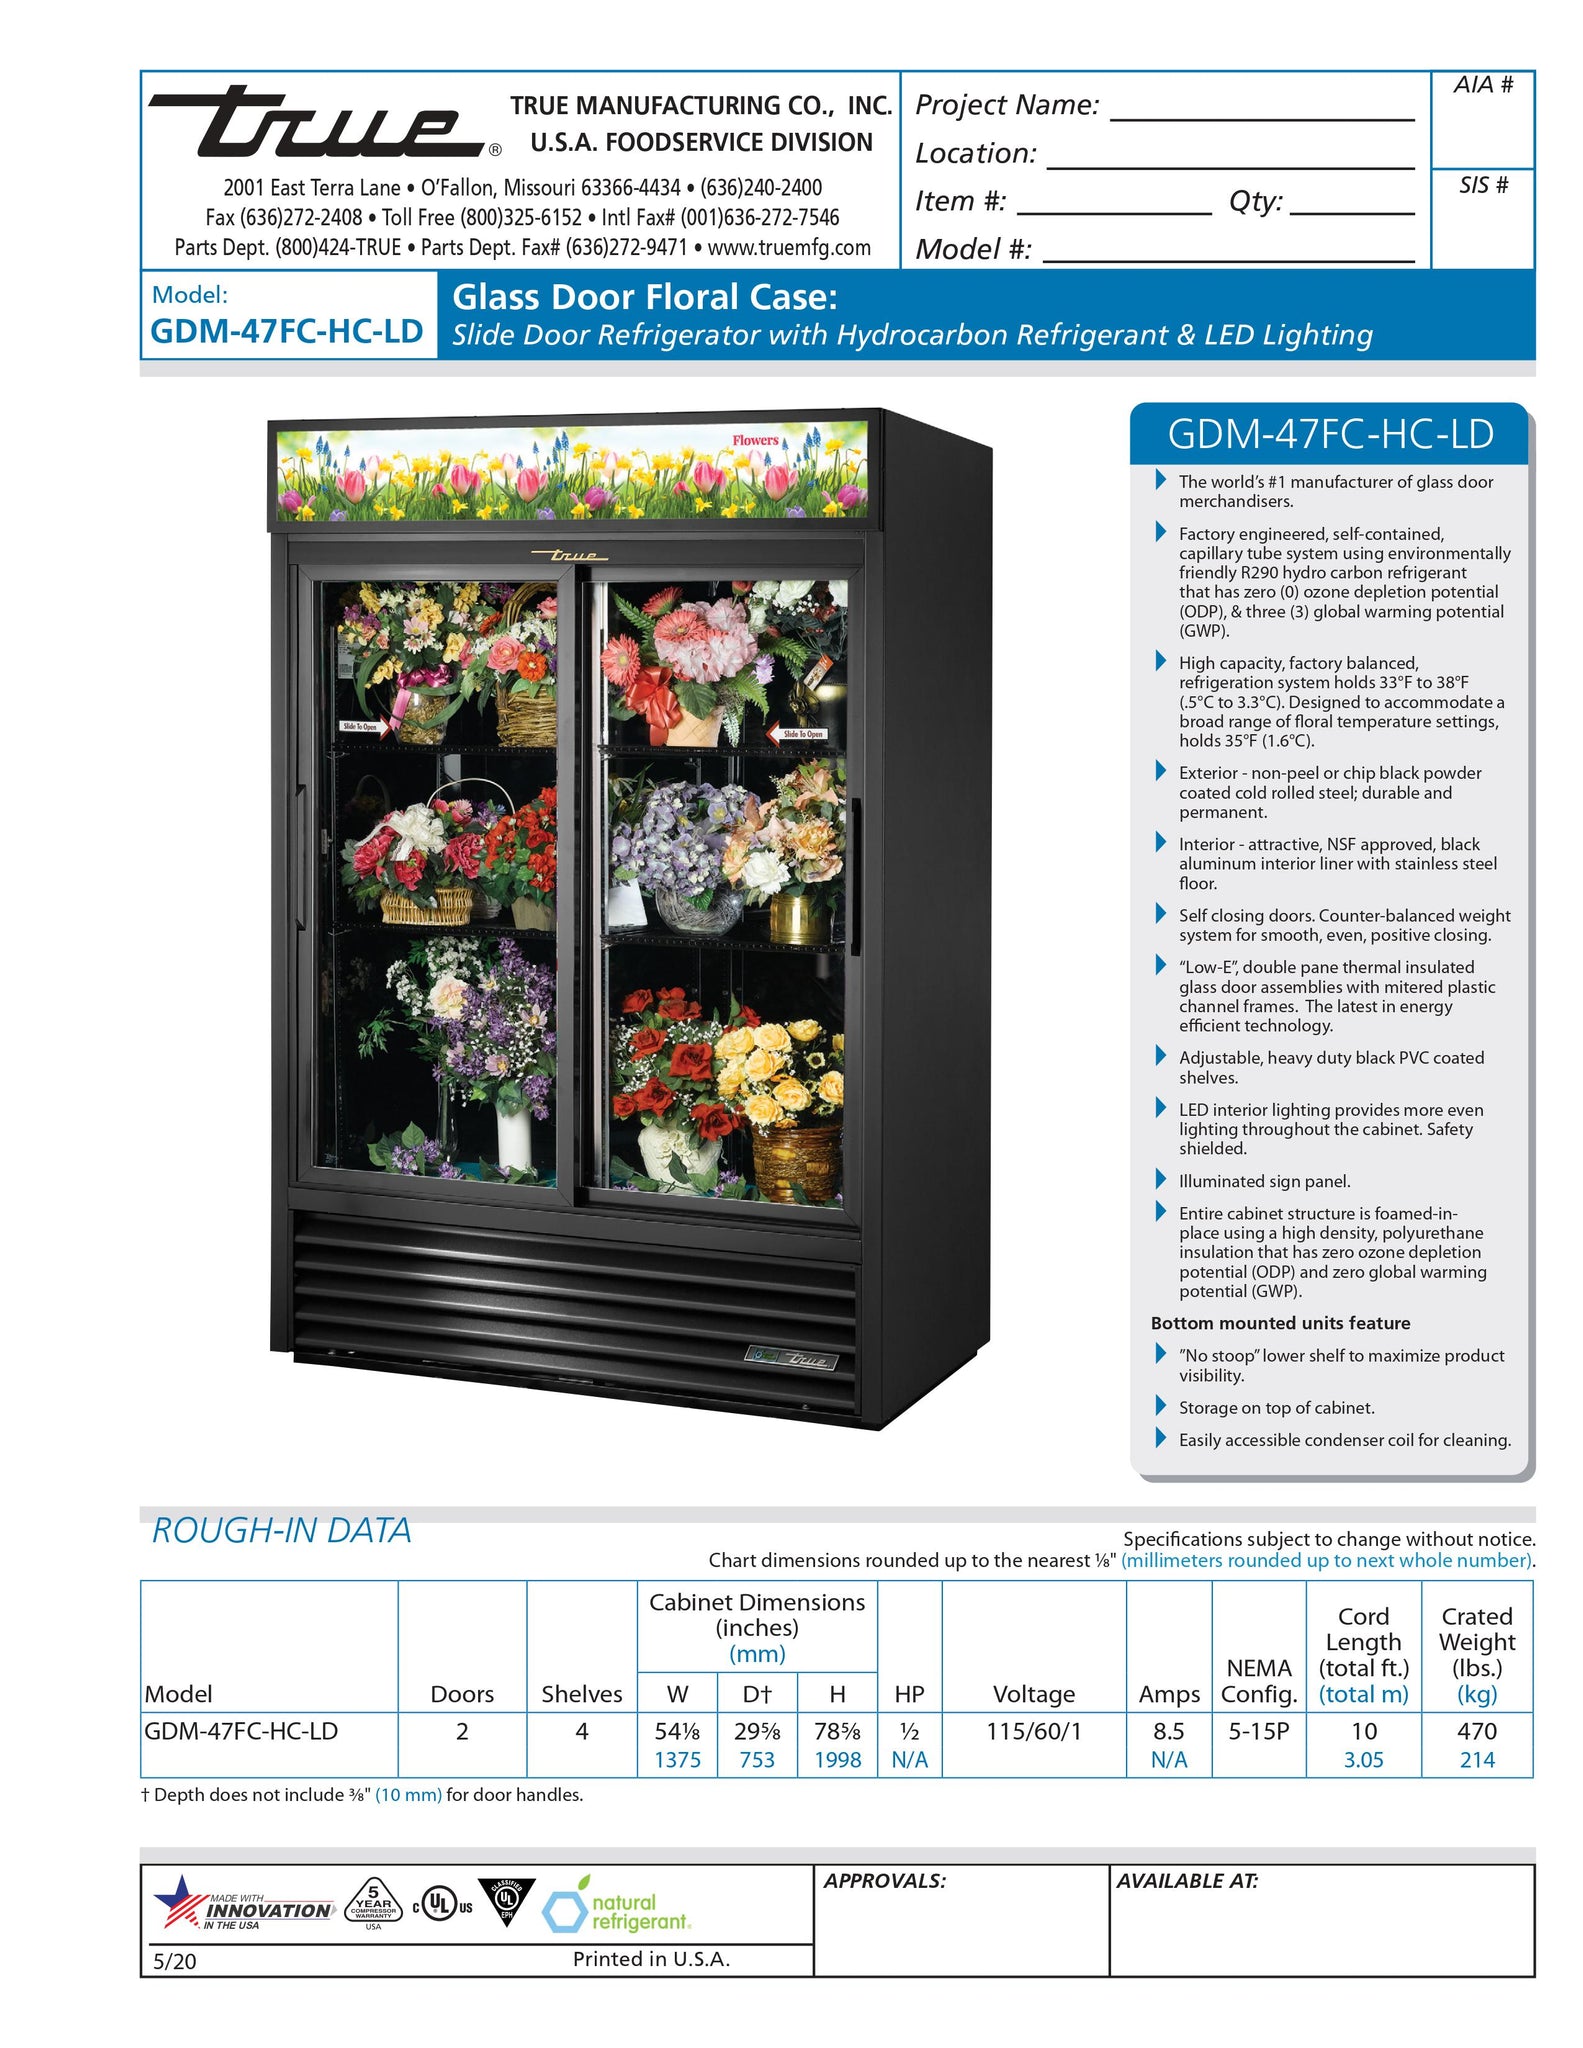 True GDM-47FC-HC-LD 54" Two Section Glass Door Refrigerated Floral Display Case